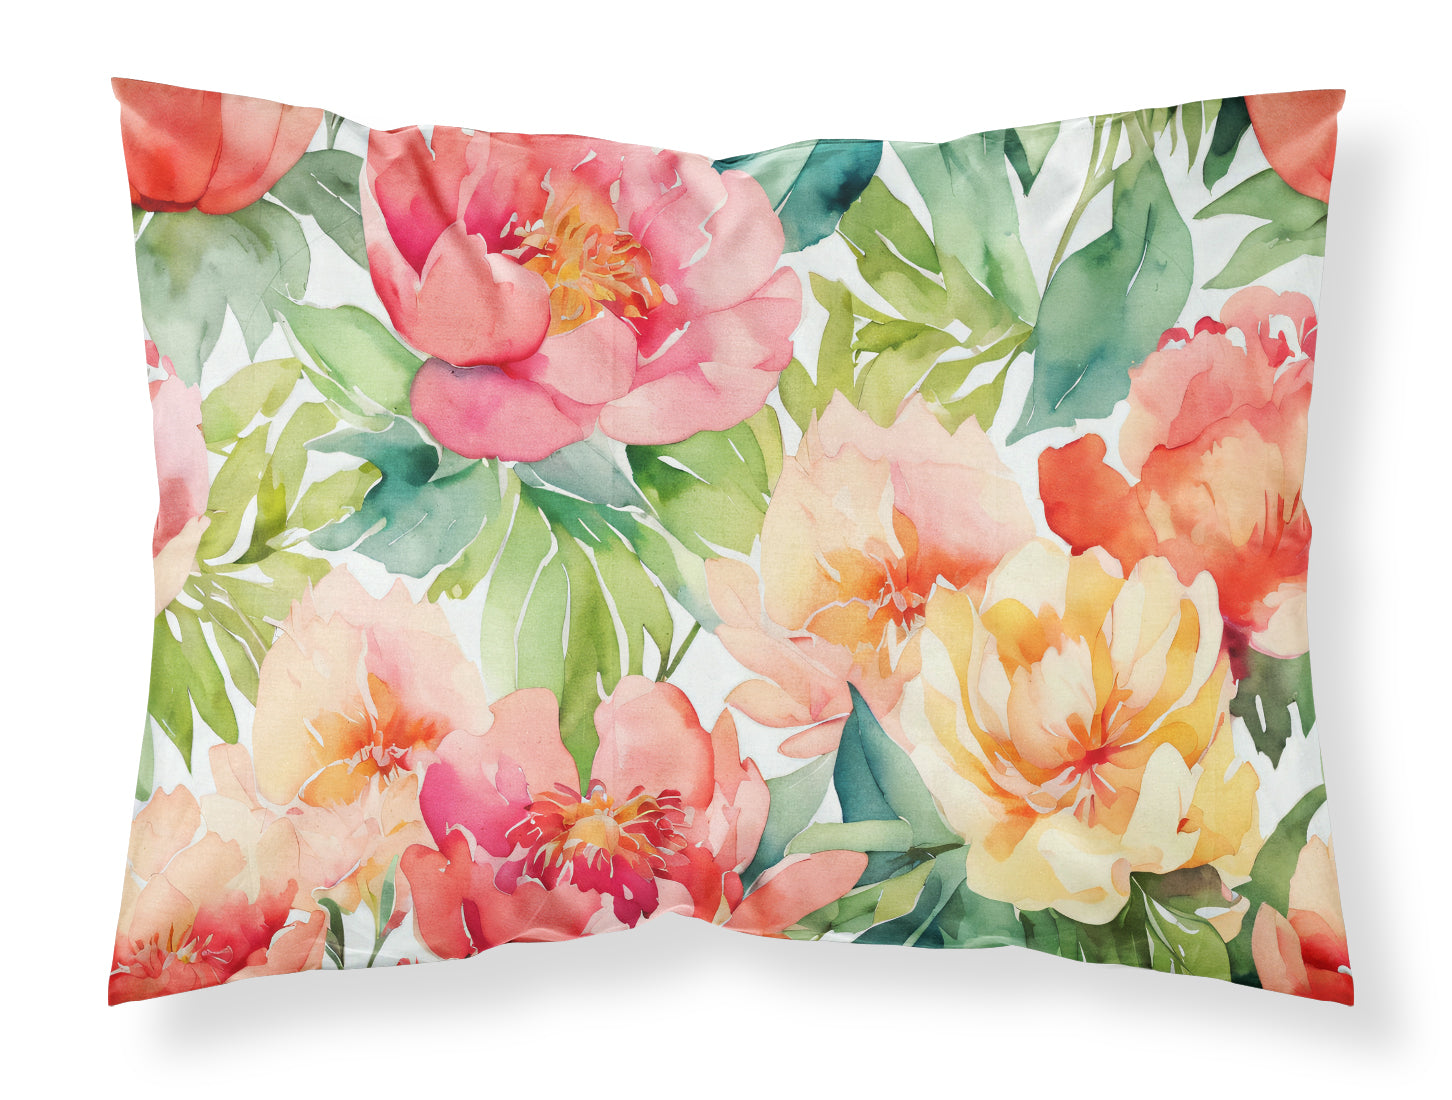 Buy this Indiana Peonies in Watercolor Fabric Standard Pillowcase